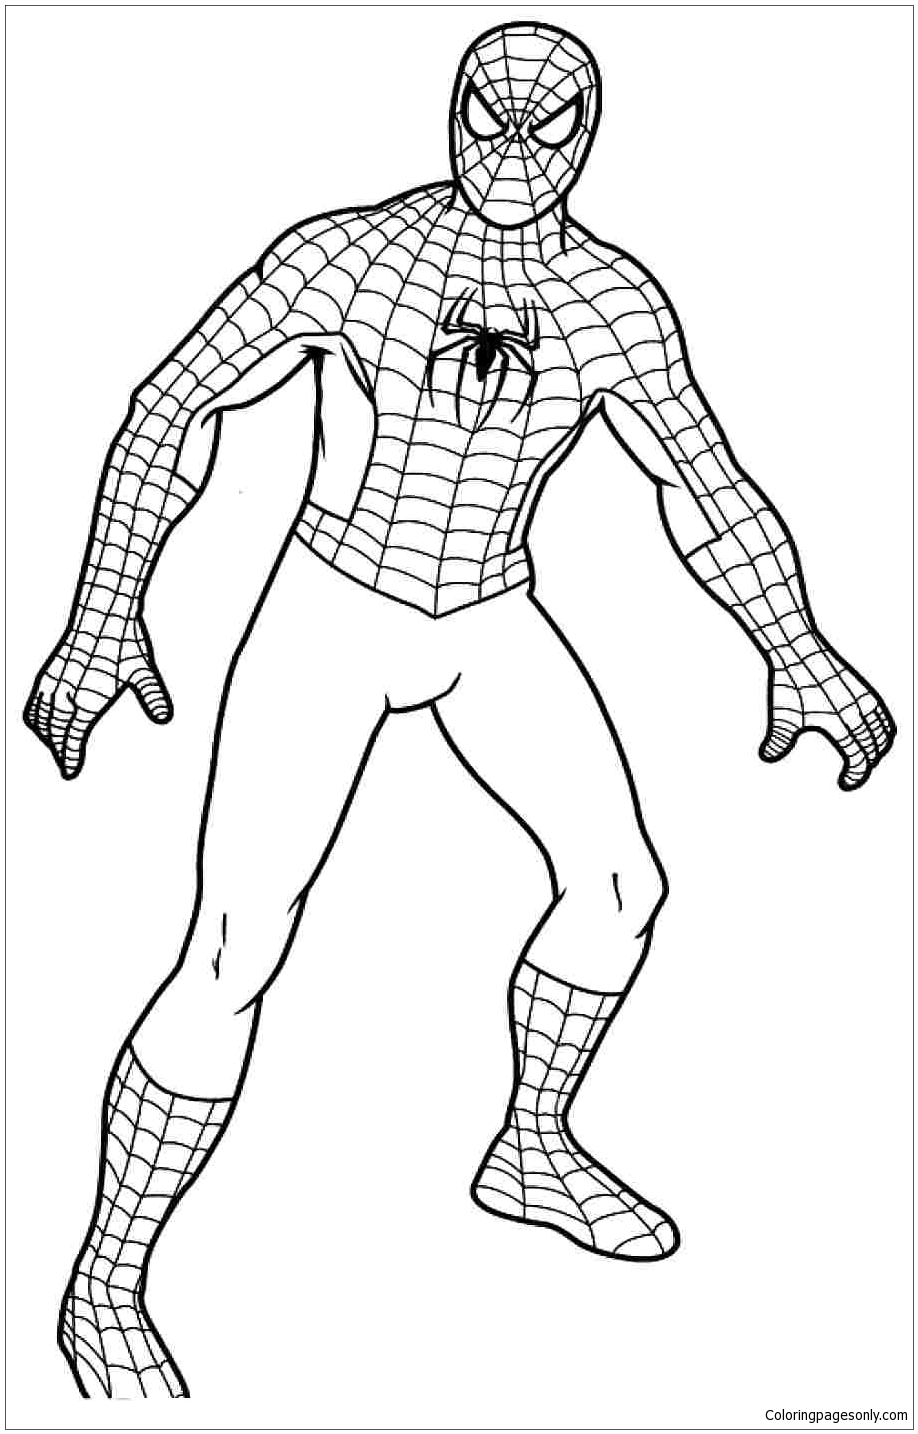 Spiderman 6 Coloring Page - Free Printable Coloring Pages